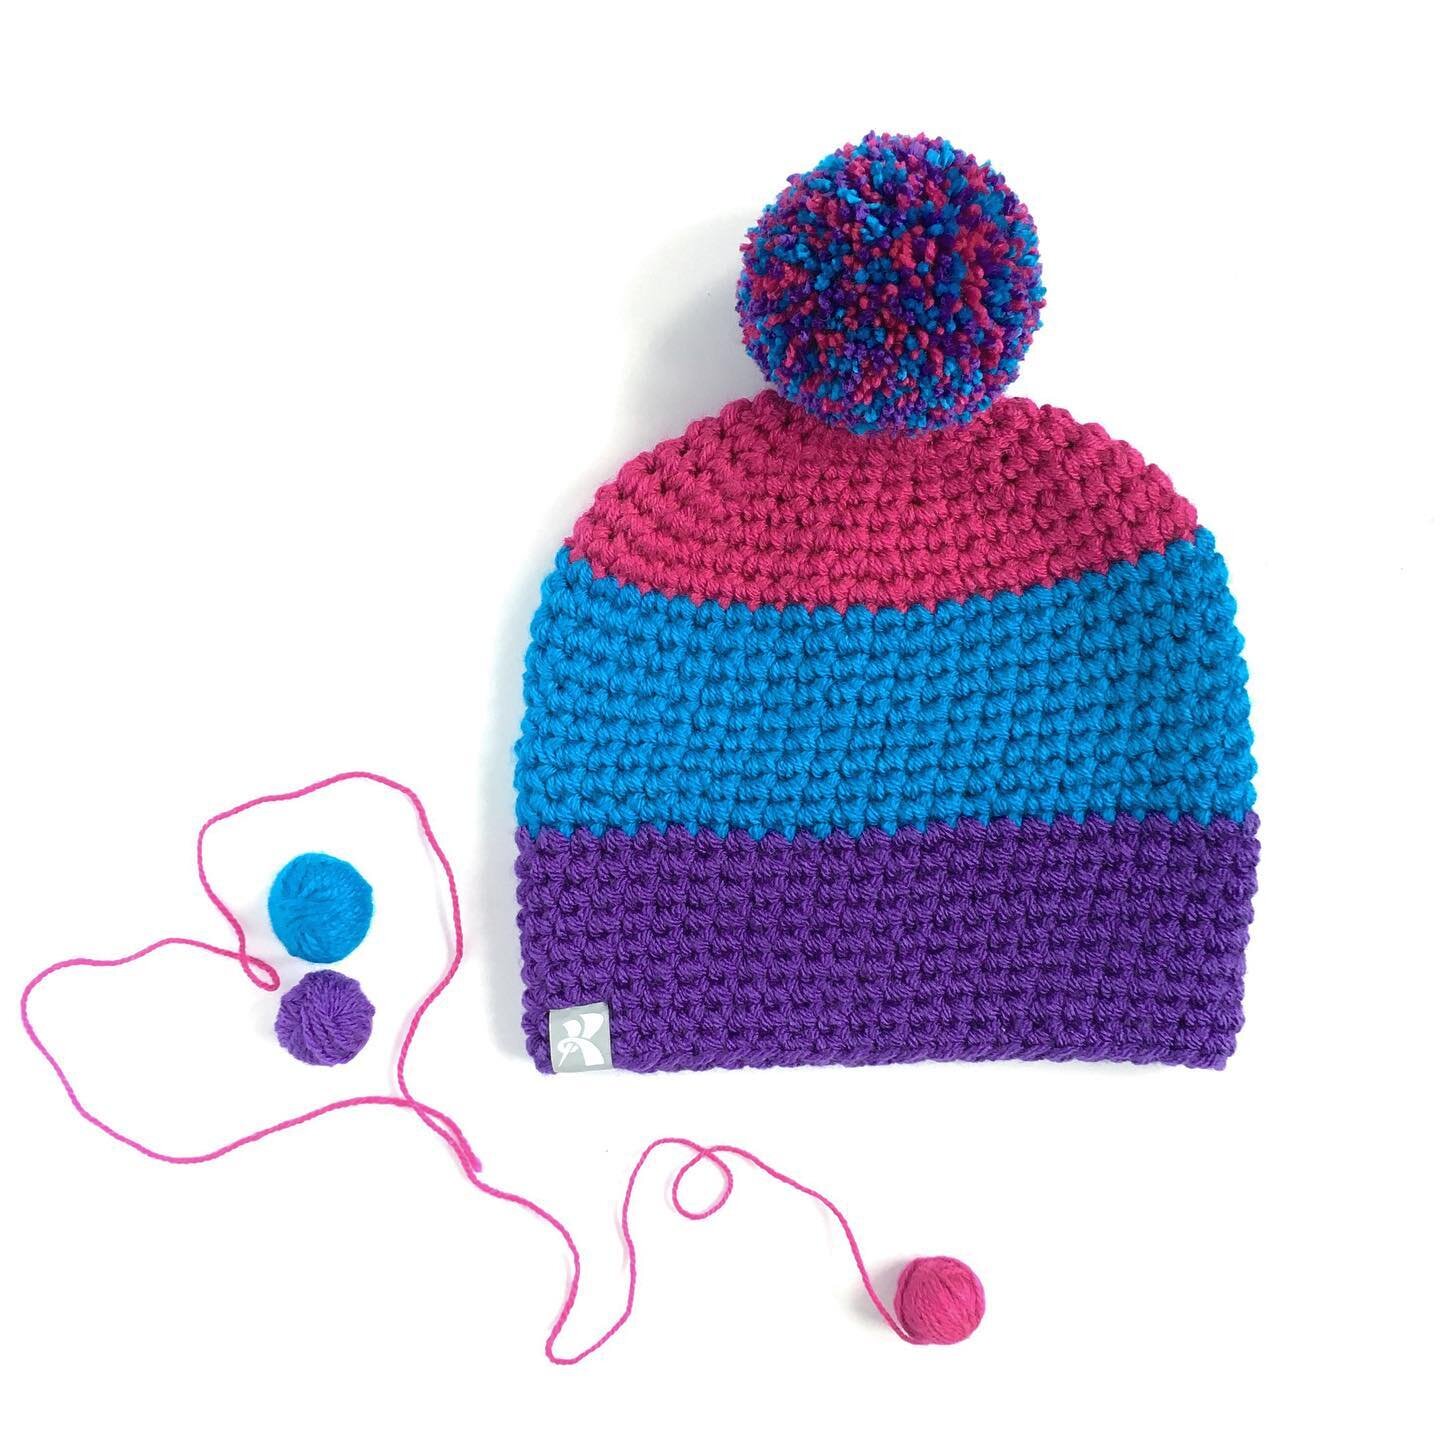 Gorgeous pompom beanie for my friend. 💗💙💜 You can design your own from www.kbeanies.com or www.etsy.com/uk/shop/KBeanies 
__________________________________✍️
#designyourown  #custombeanie #colourblock #design
#pompom #pompombeanie  #blues #skihat